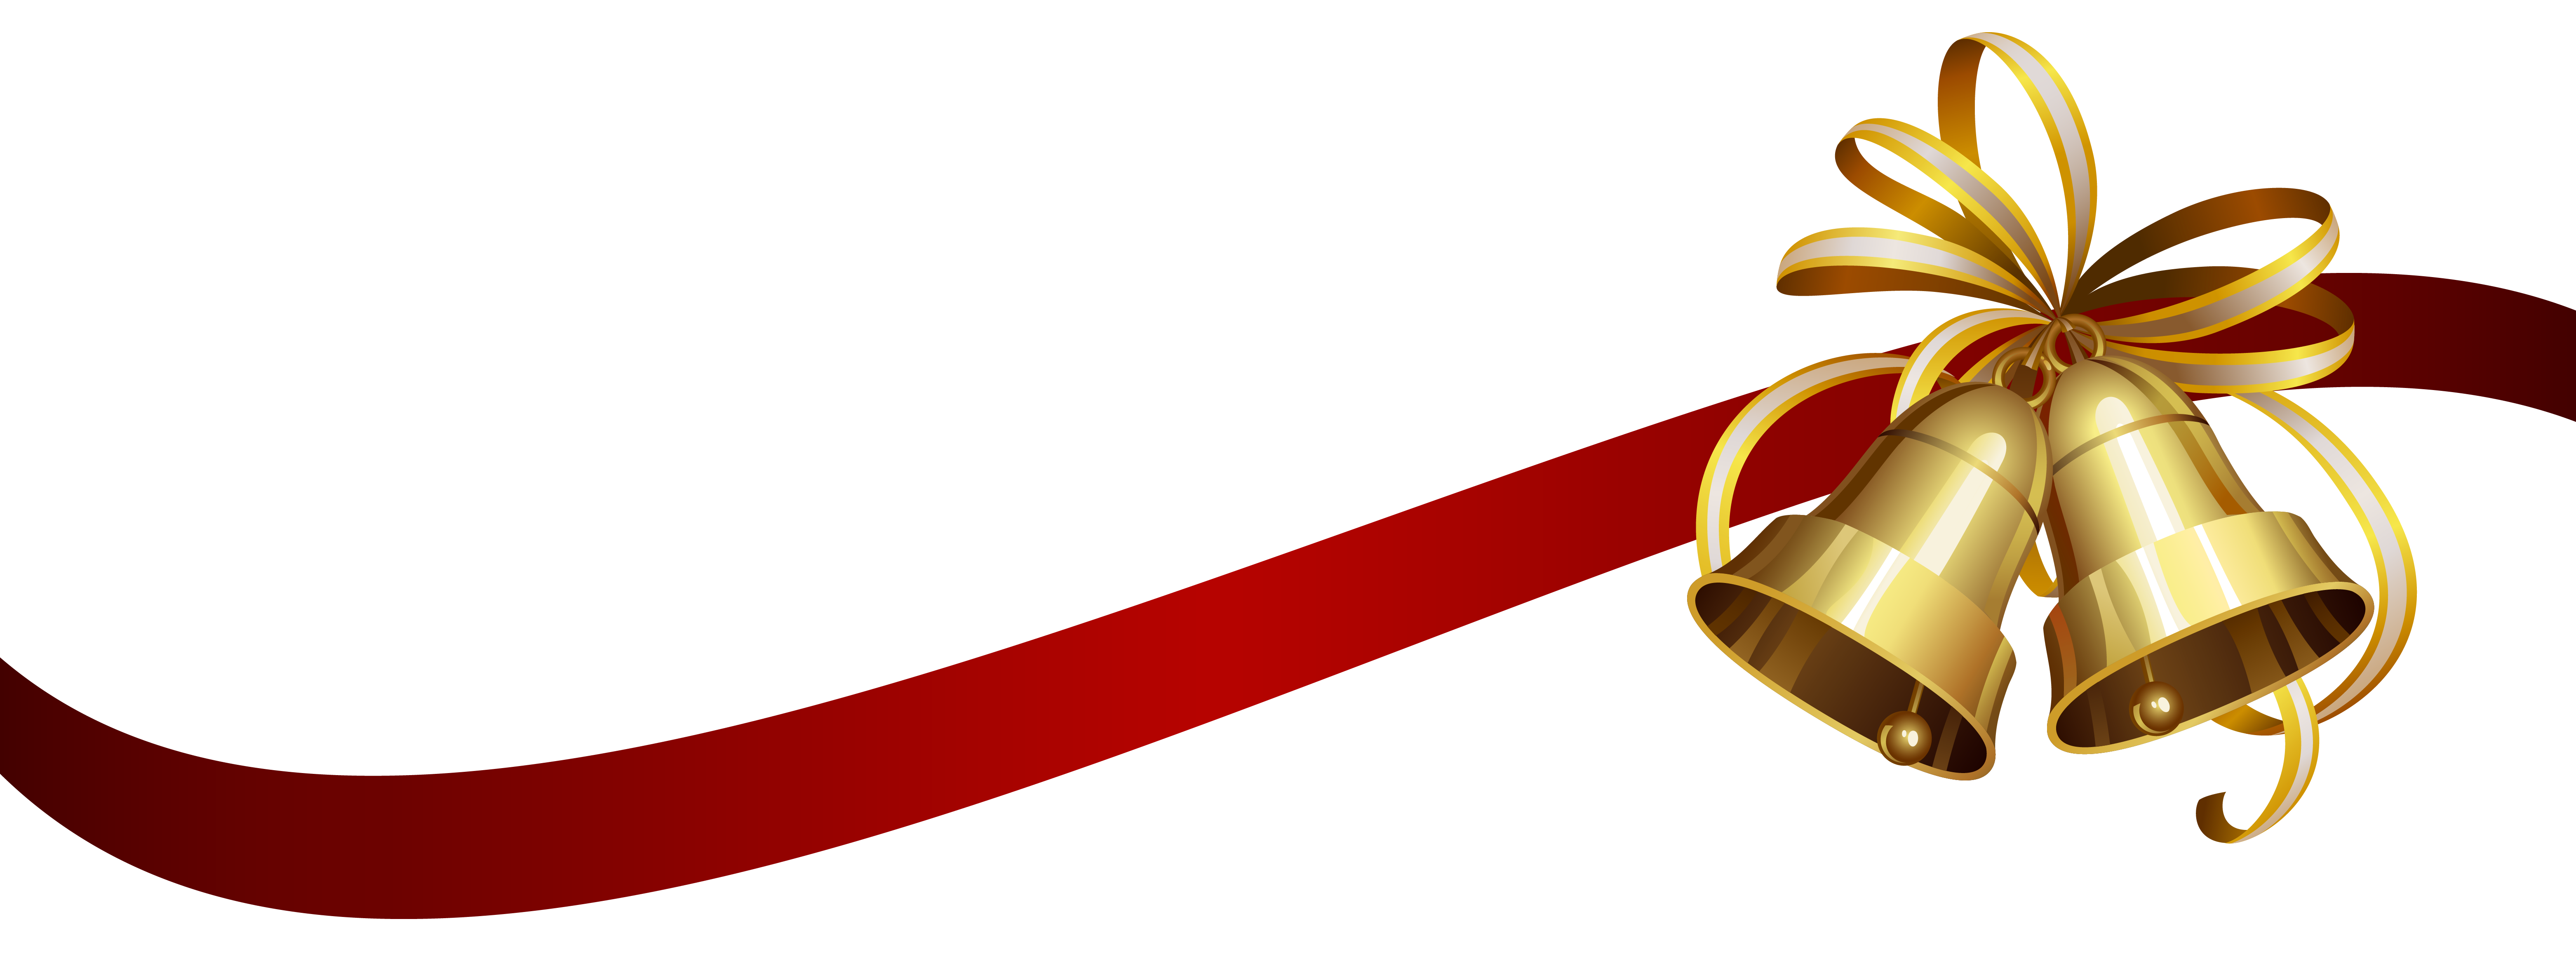 Christmas bells with transparent. Clipart border ribbon